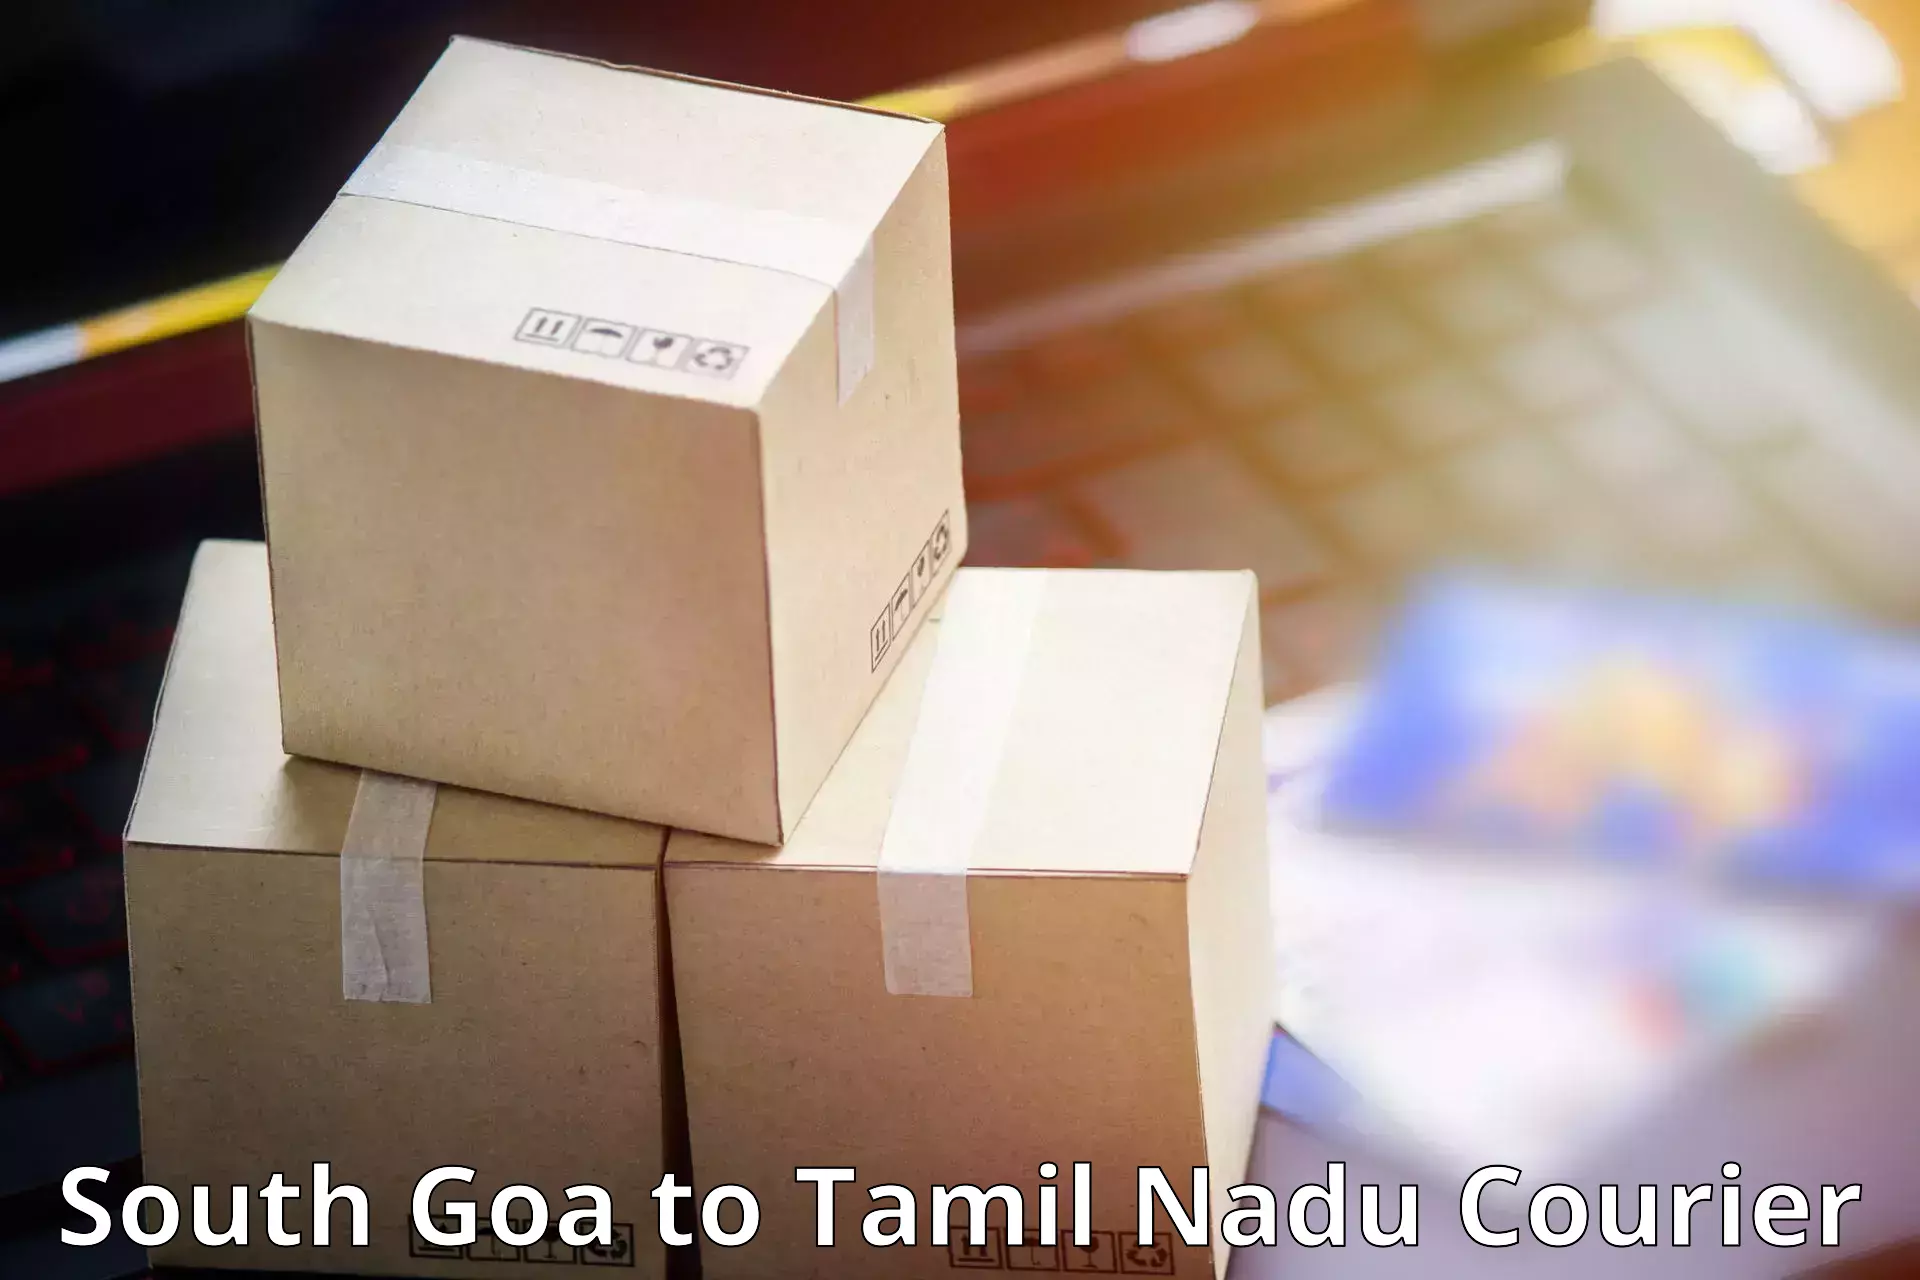 Cash on delivery service South Goa to Tiruchi